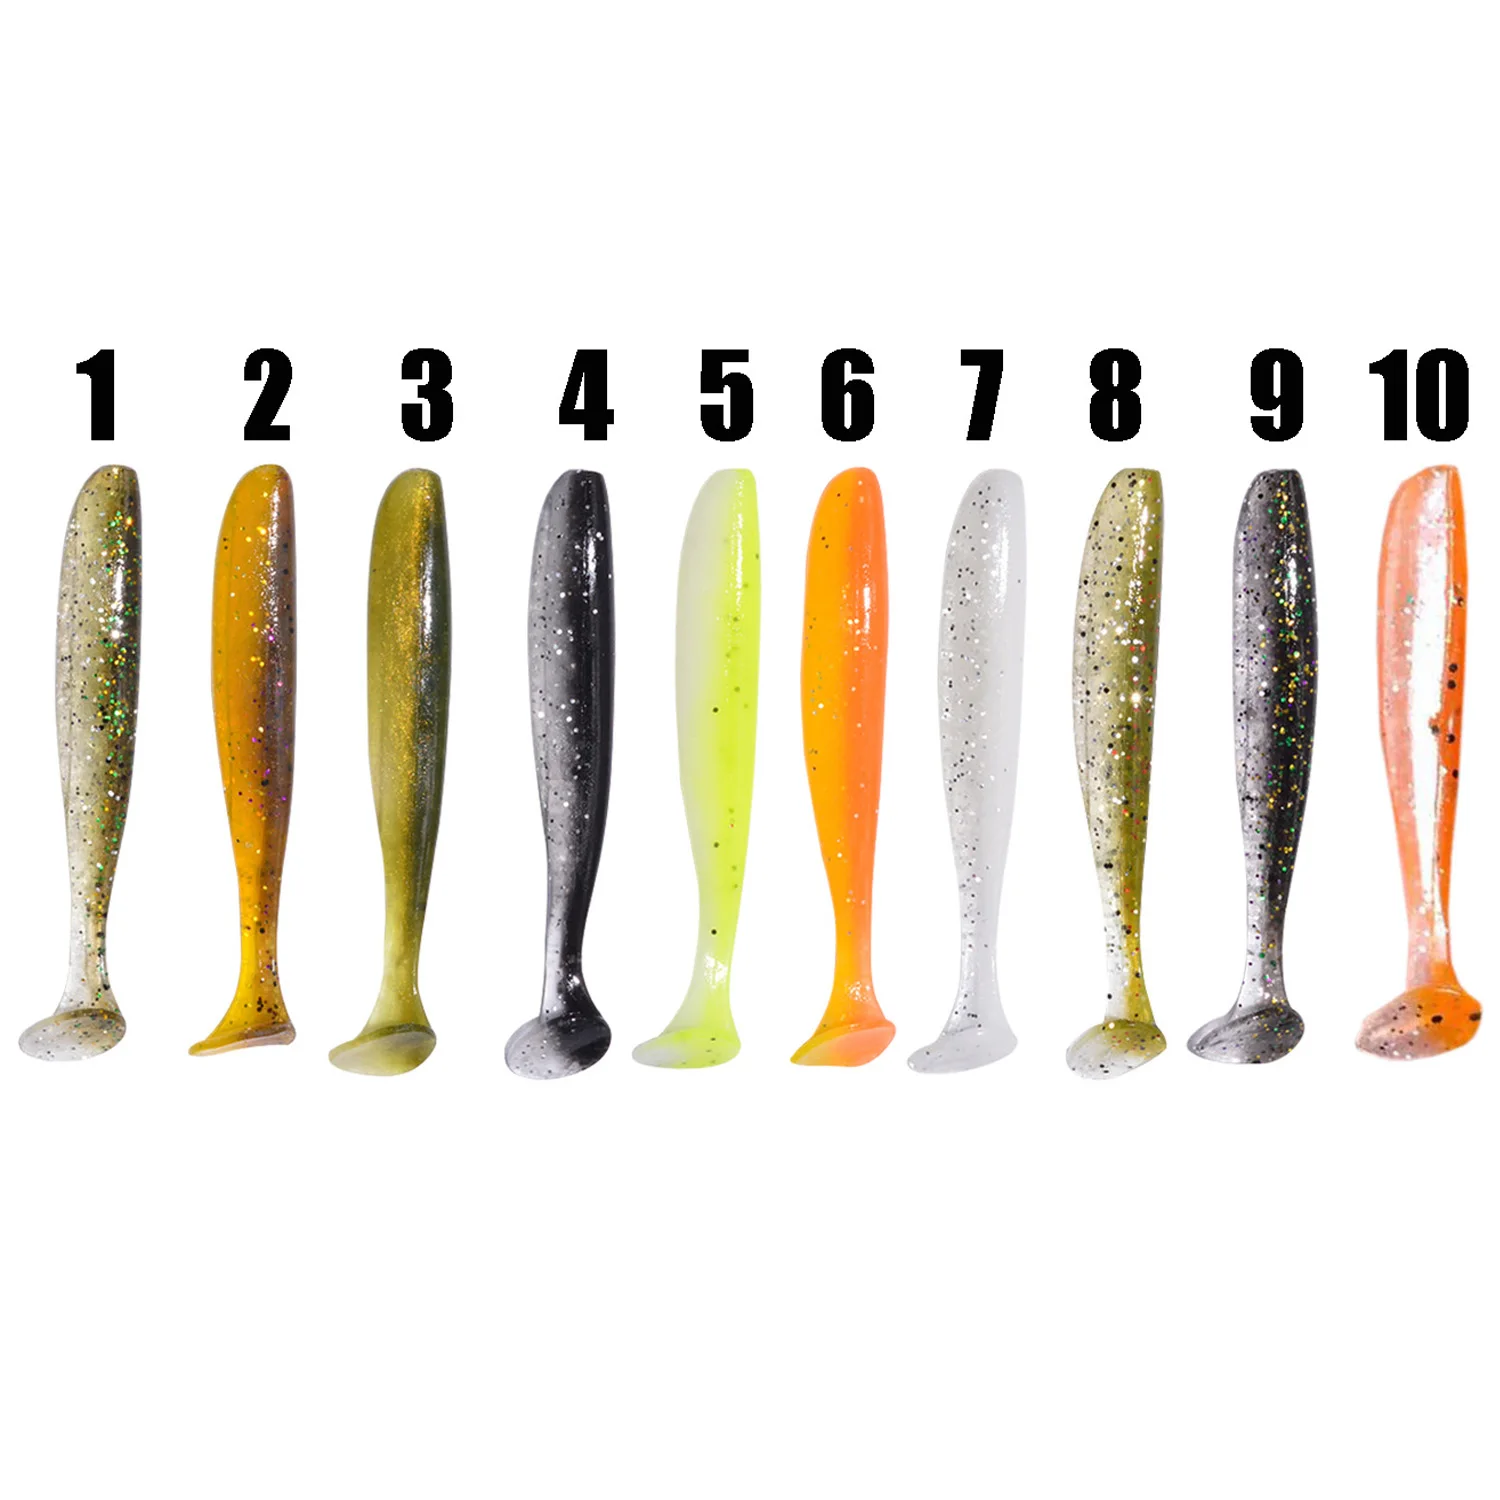 

Double Color T Tail soft plastic lures 68mm 2.3g bionic shad lure paddle tail bass fishing lure artificial bait, 10colors